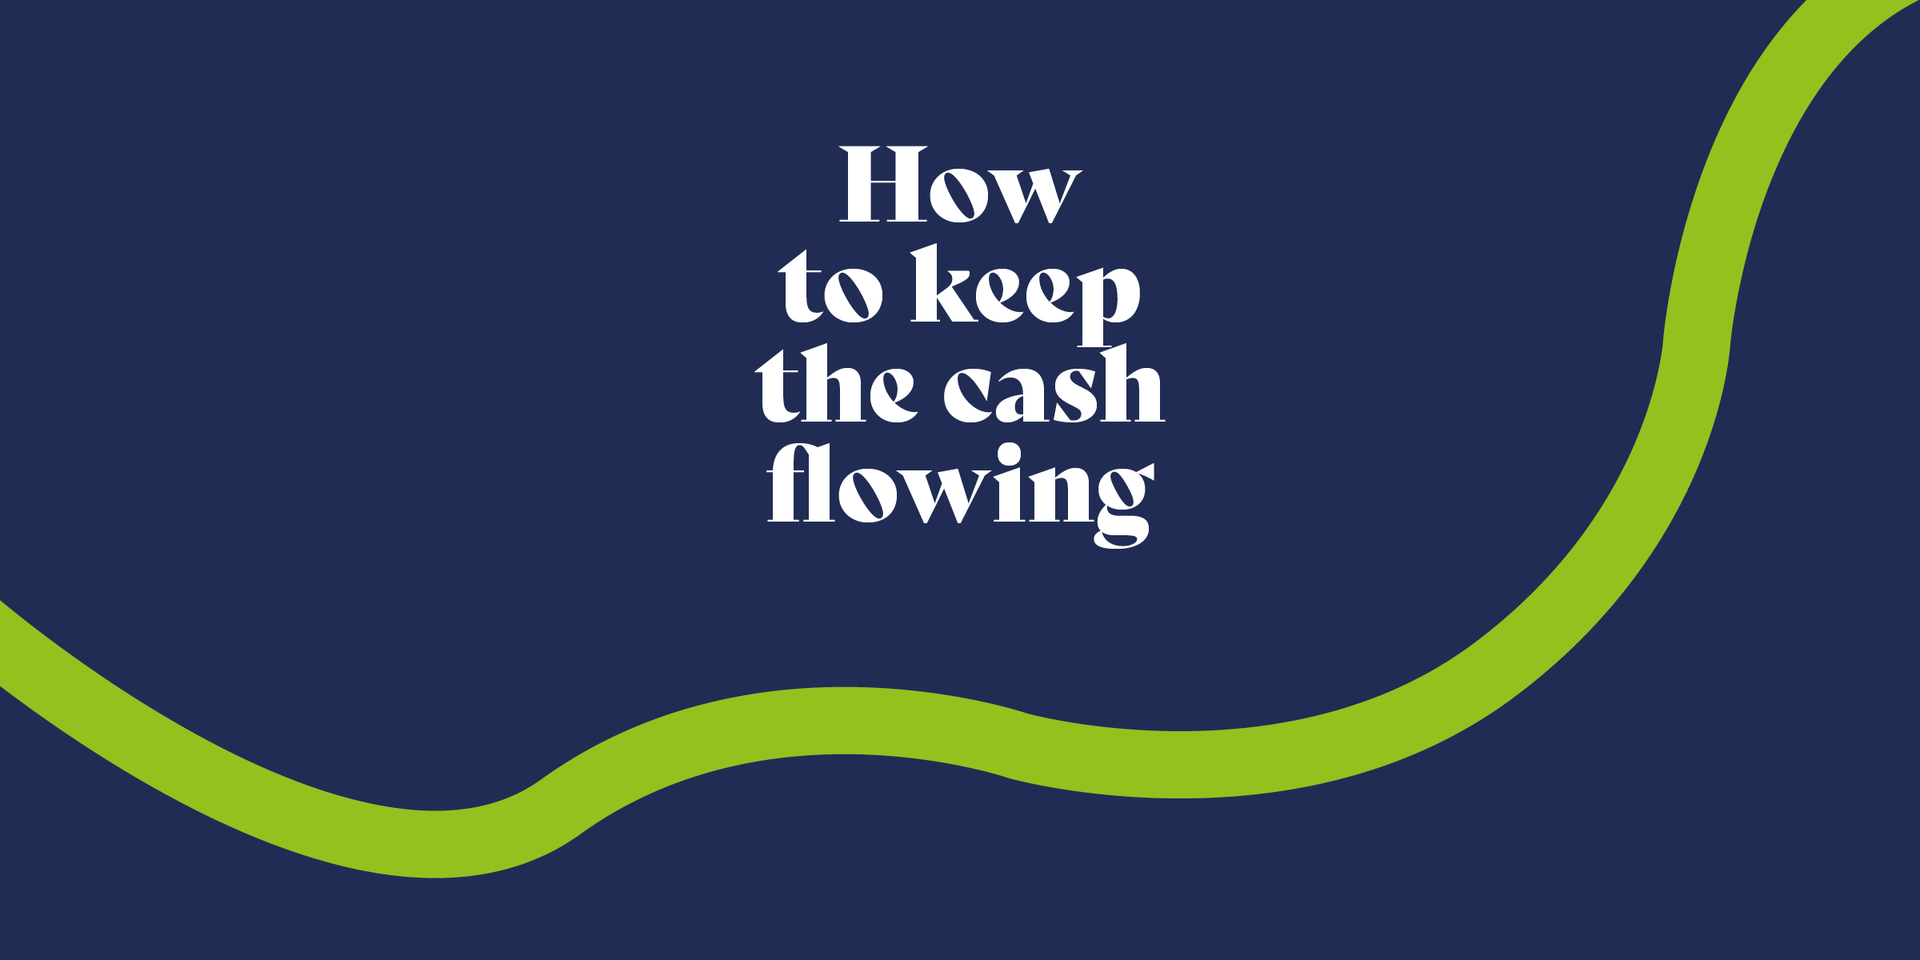 Running a business is hard work, and keeping your business afloat with steady cashflow can be tricky